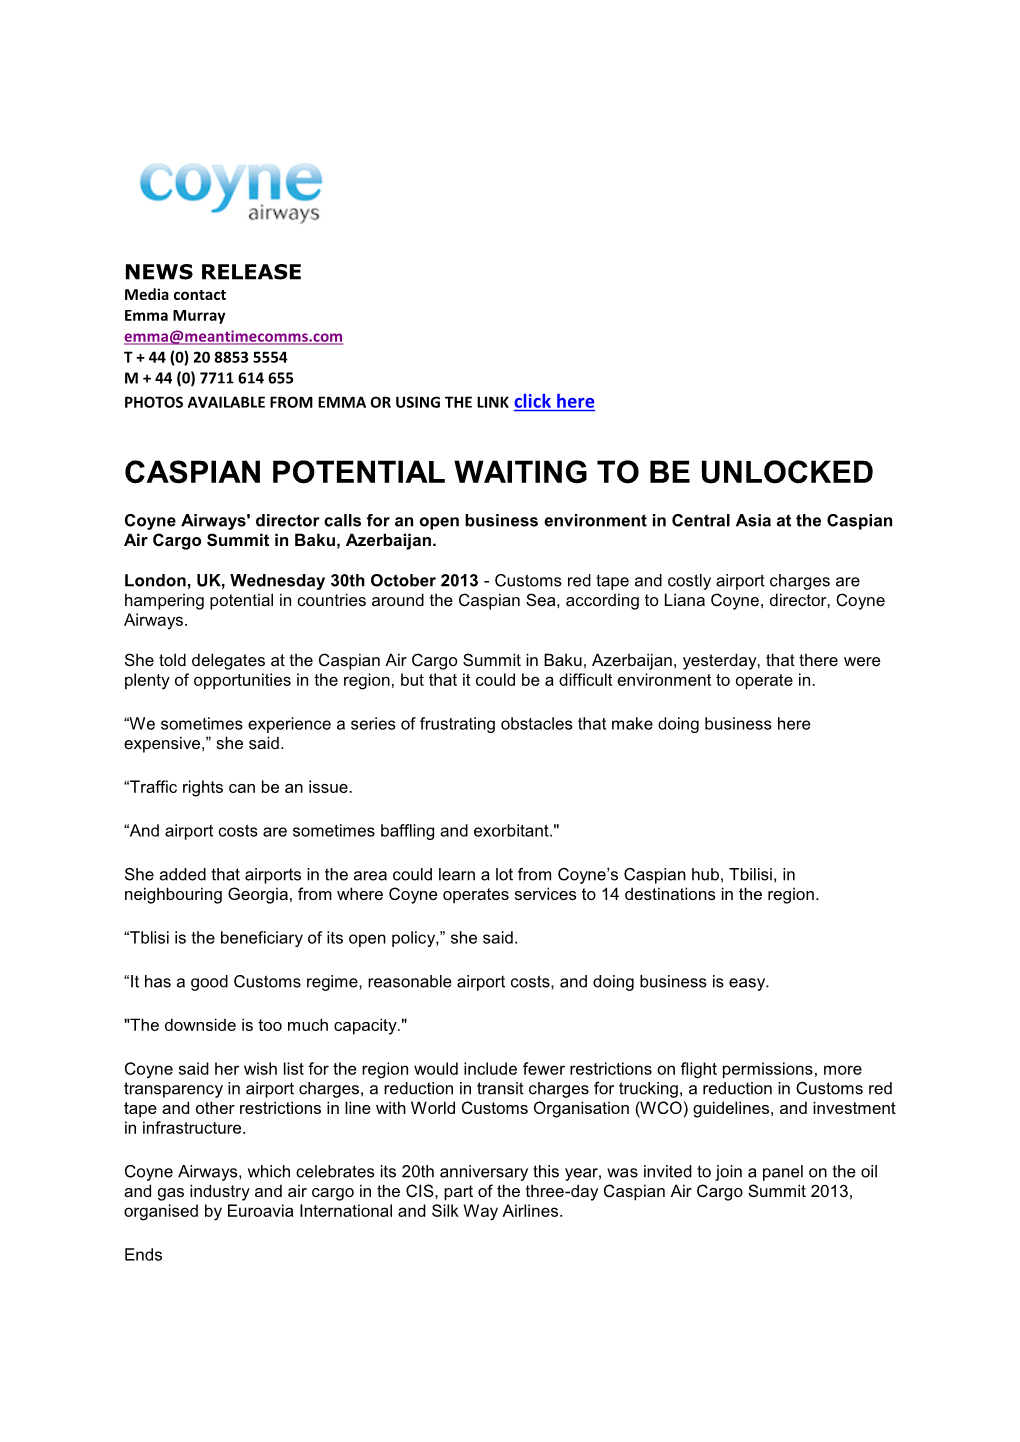 Caspian Potential Waiting to Be Unlocked